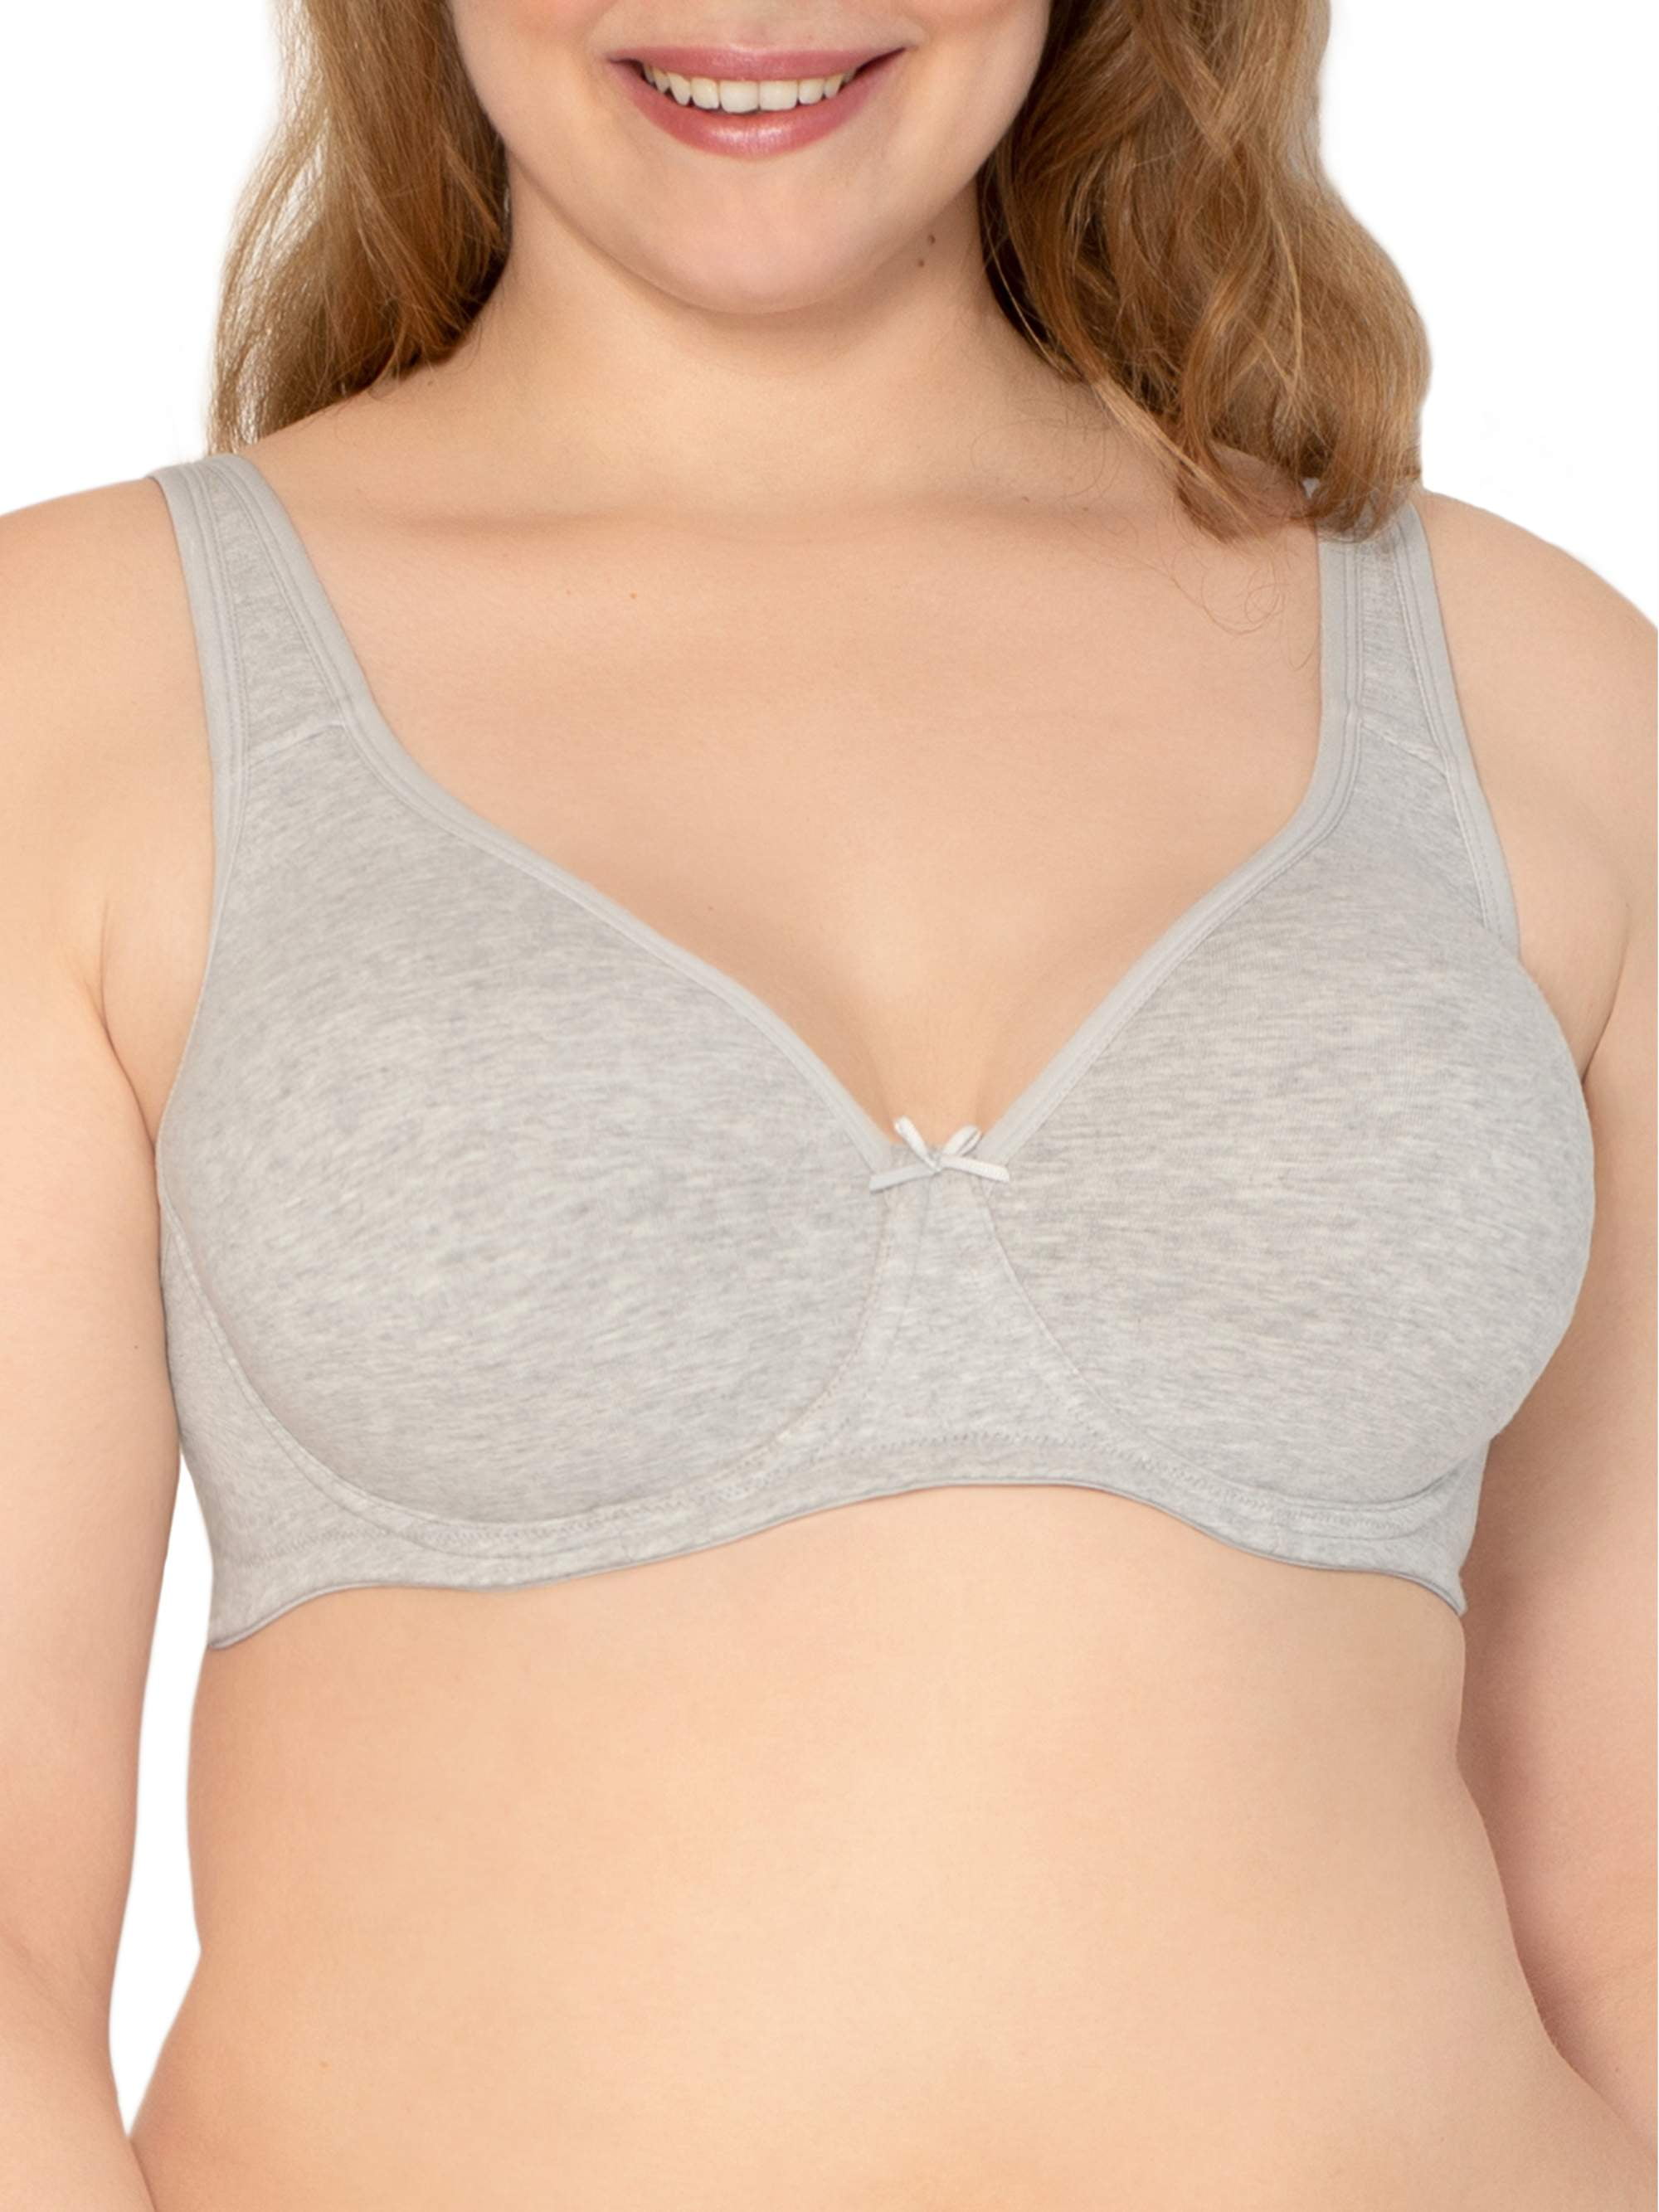 Fruit of the Loom womens Plus-size Cotton Unlined Underwire Full